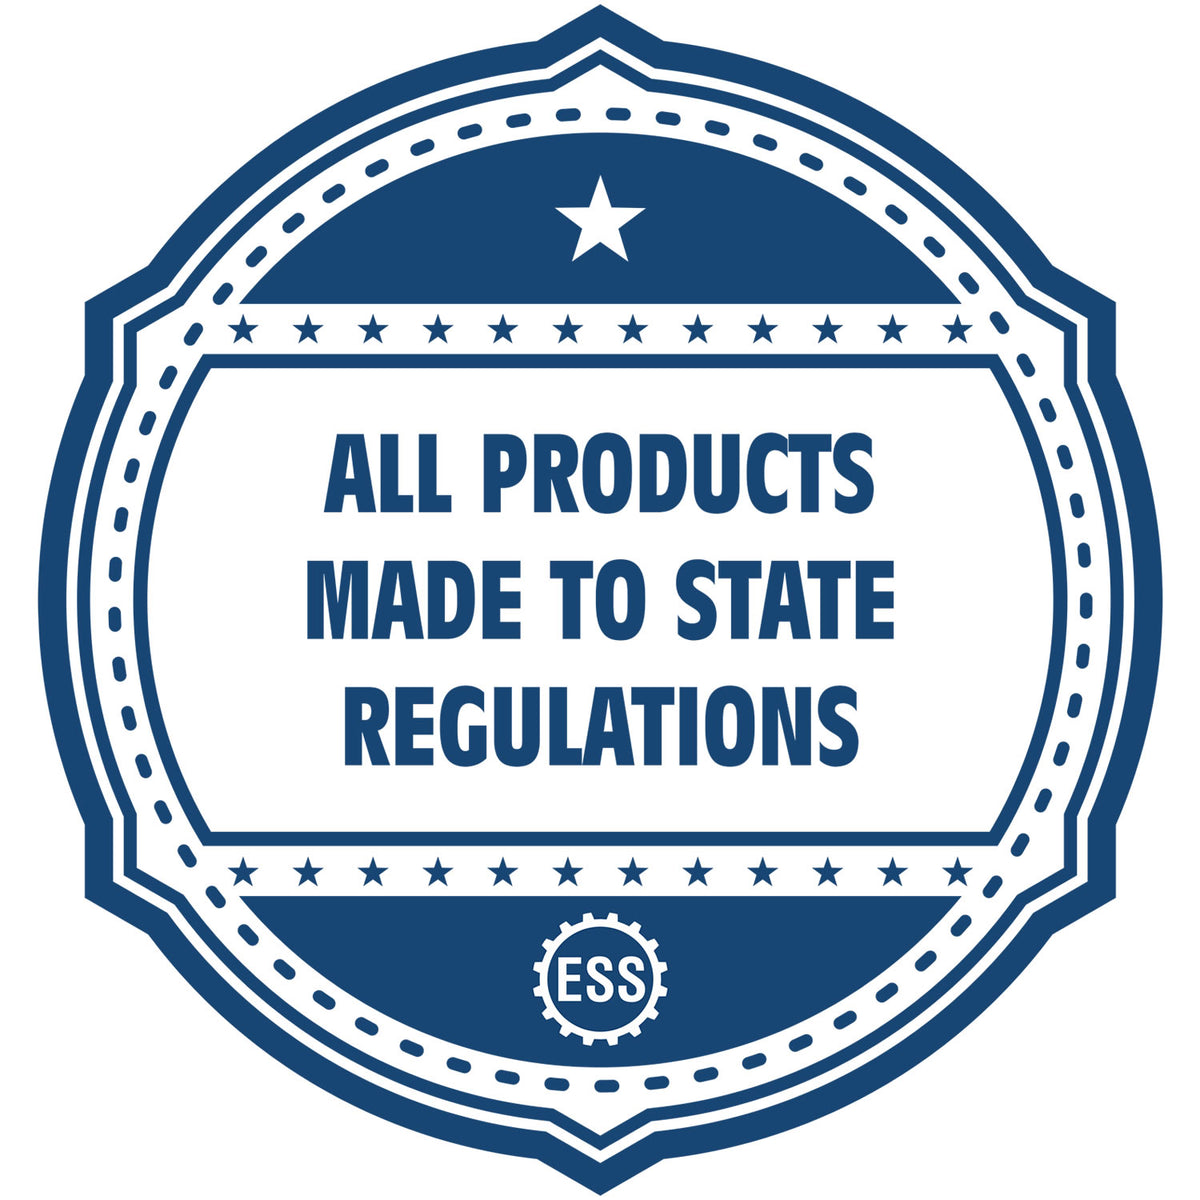 A blue icon or badge for the State of Tennessee Extended Long Reach Geologist Seal showing that this product is made in compliance with state regulations.